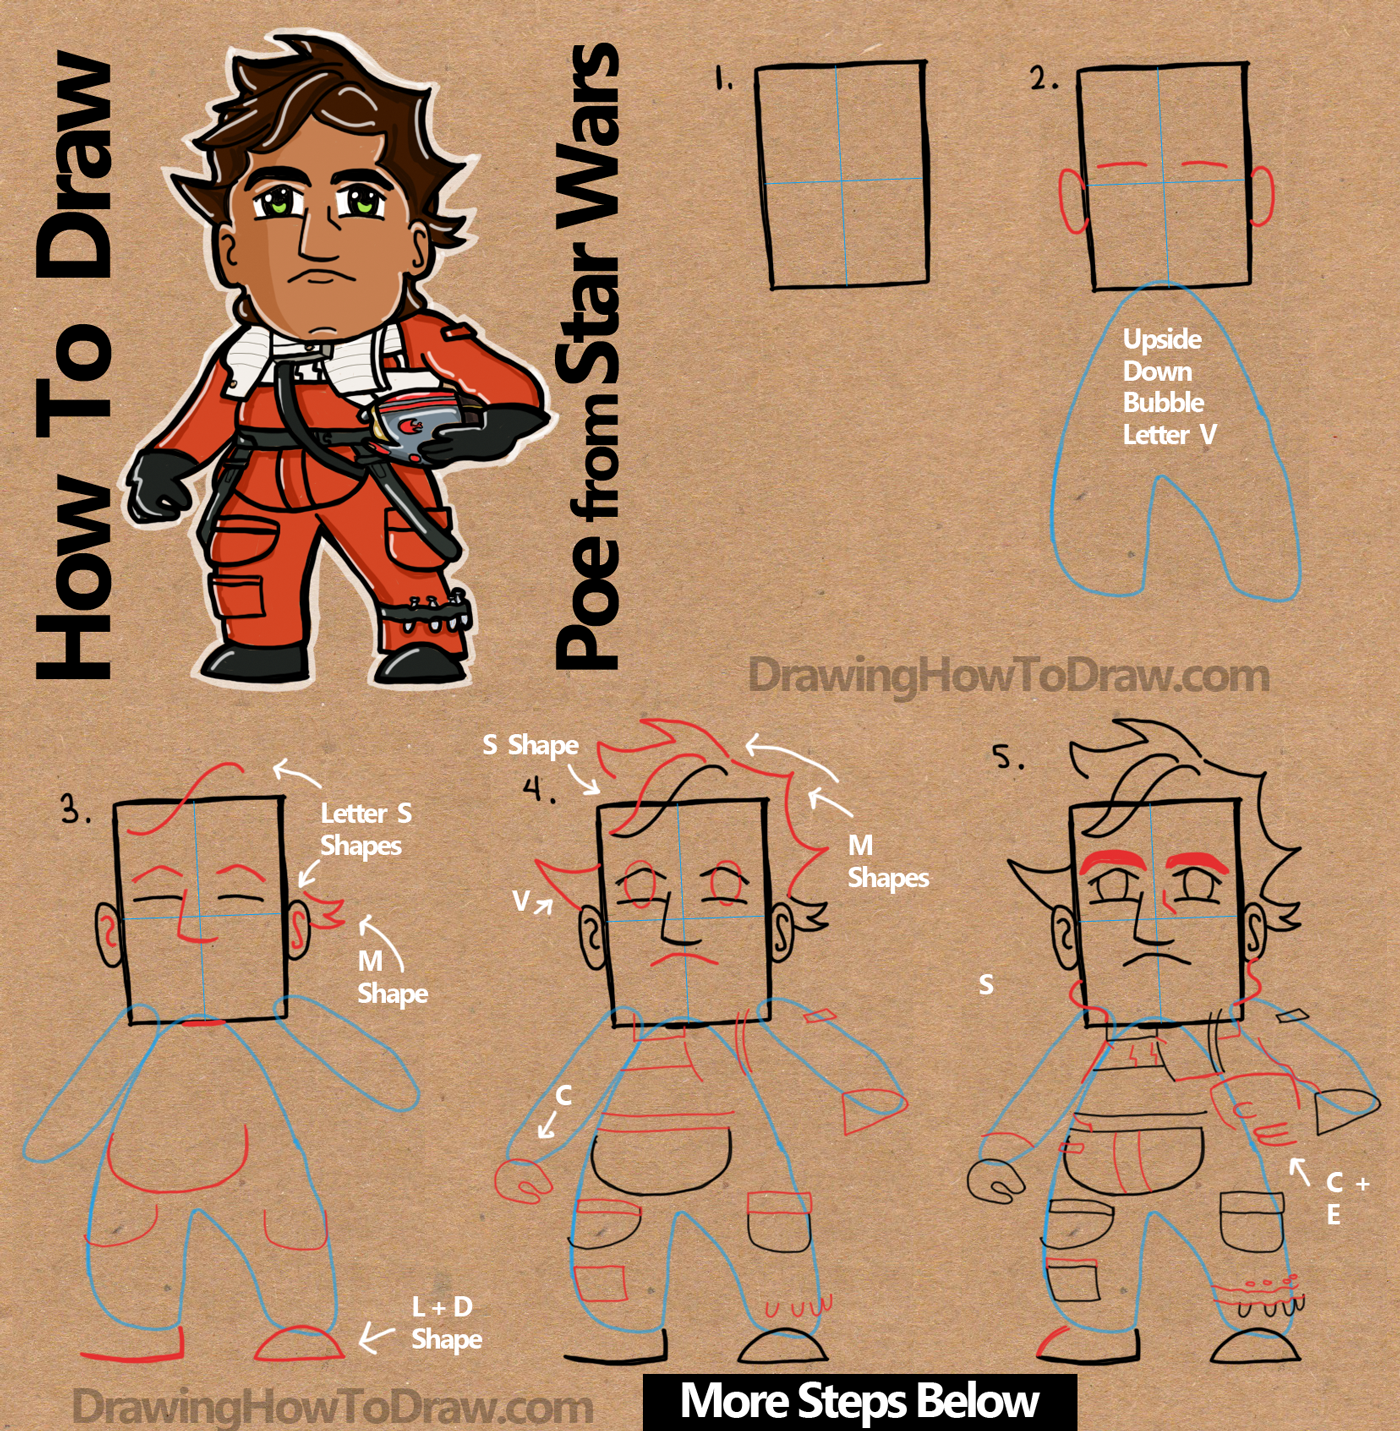 How to Draw Cartoon Chibi Poe from Star Wars The Force Awakens : Step by Step Drawing Tutorial